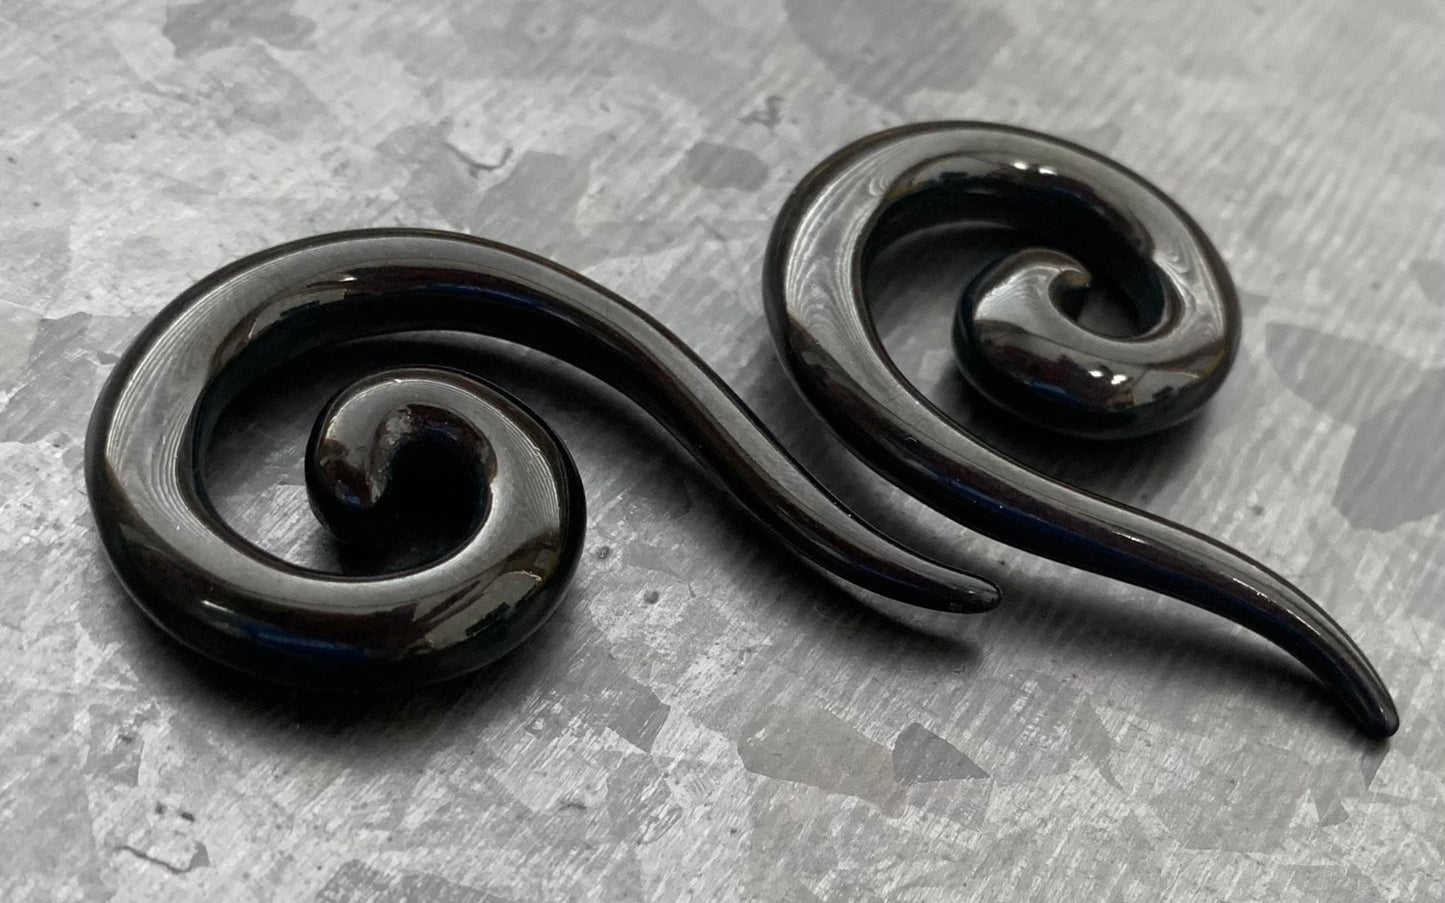 PAIR of Beautiful Surgical Steel Spiral Hanging Tapers Expanders - Black, Gold and Rainbow- Gauges 12g (2mm) thru 2g (6mm) available!